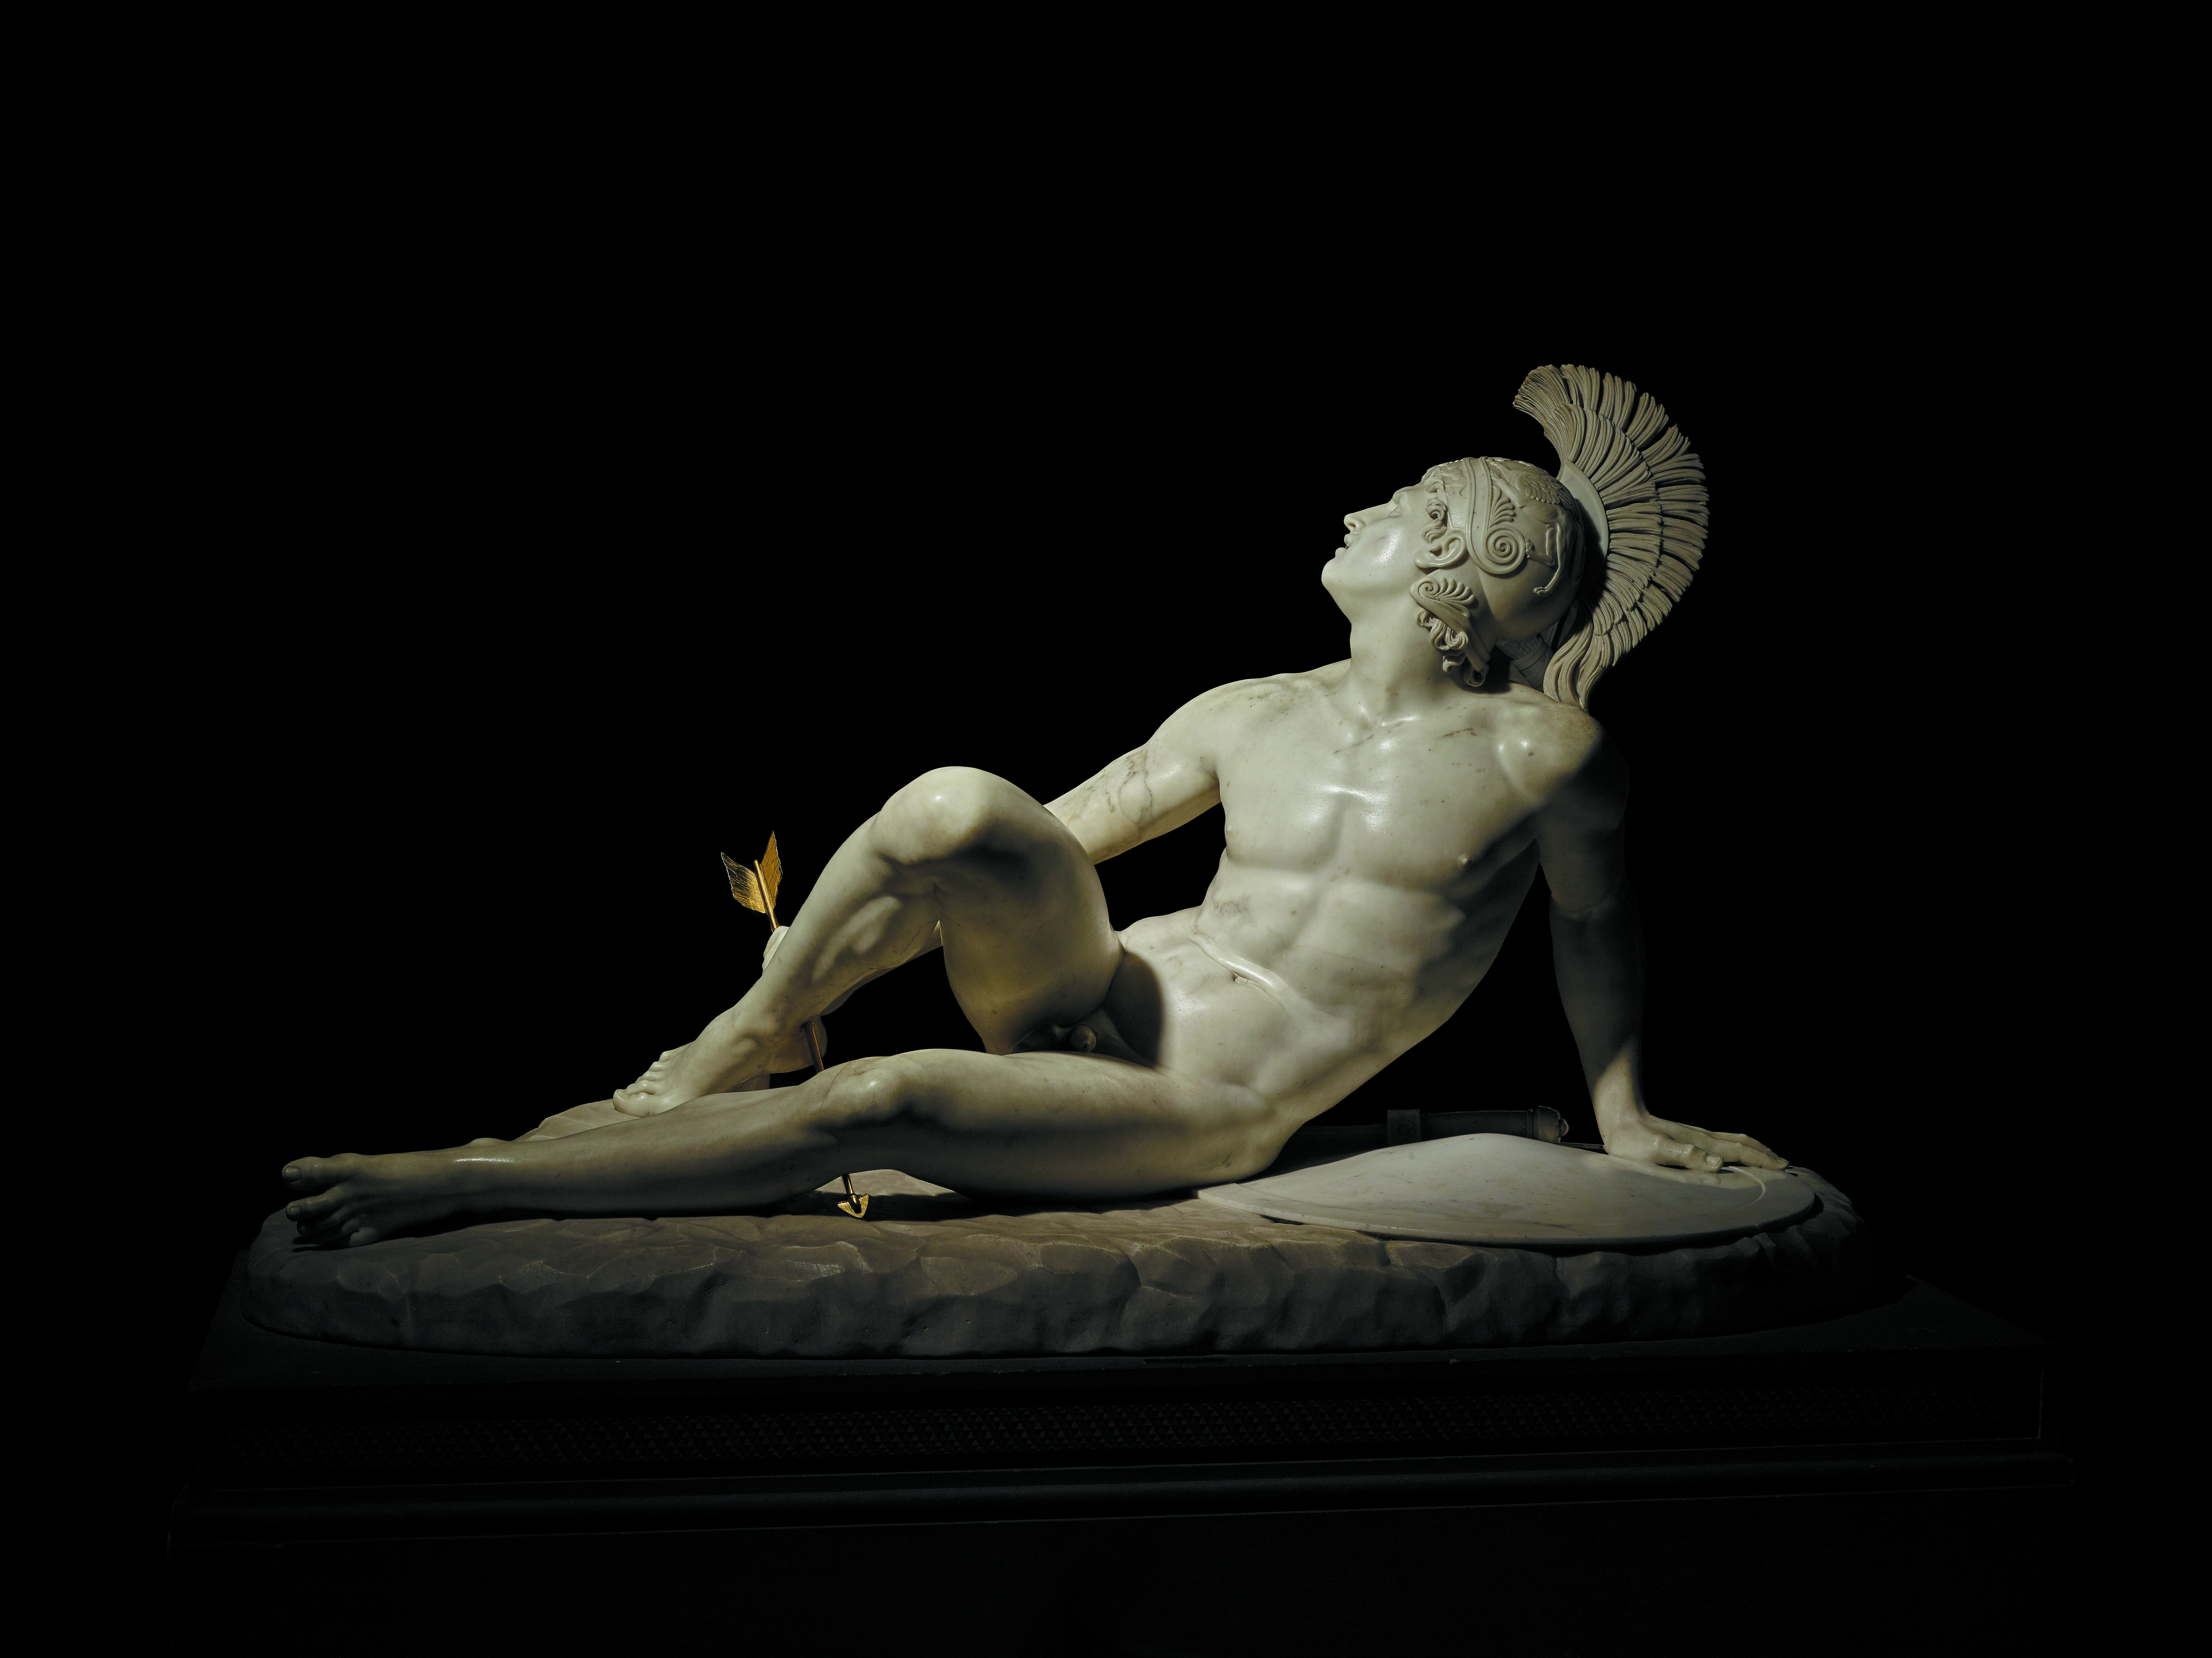 Filippo Albacini (1777-1858), The Wounded Achilles, 1825, marble, Chatsworth House